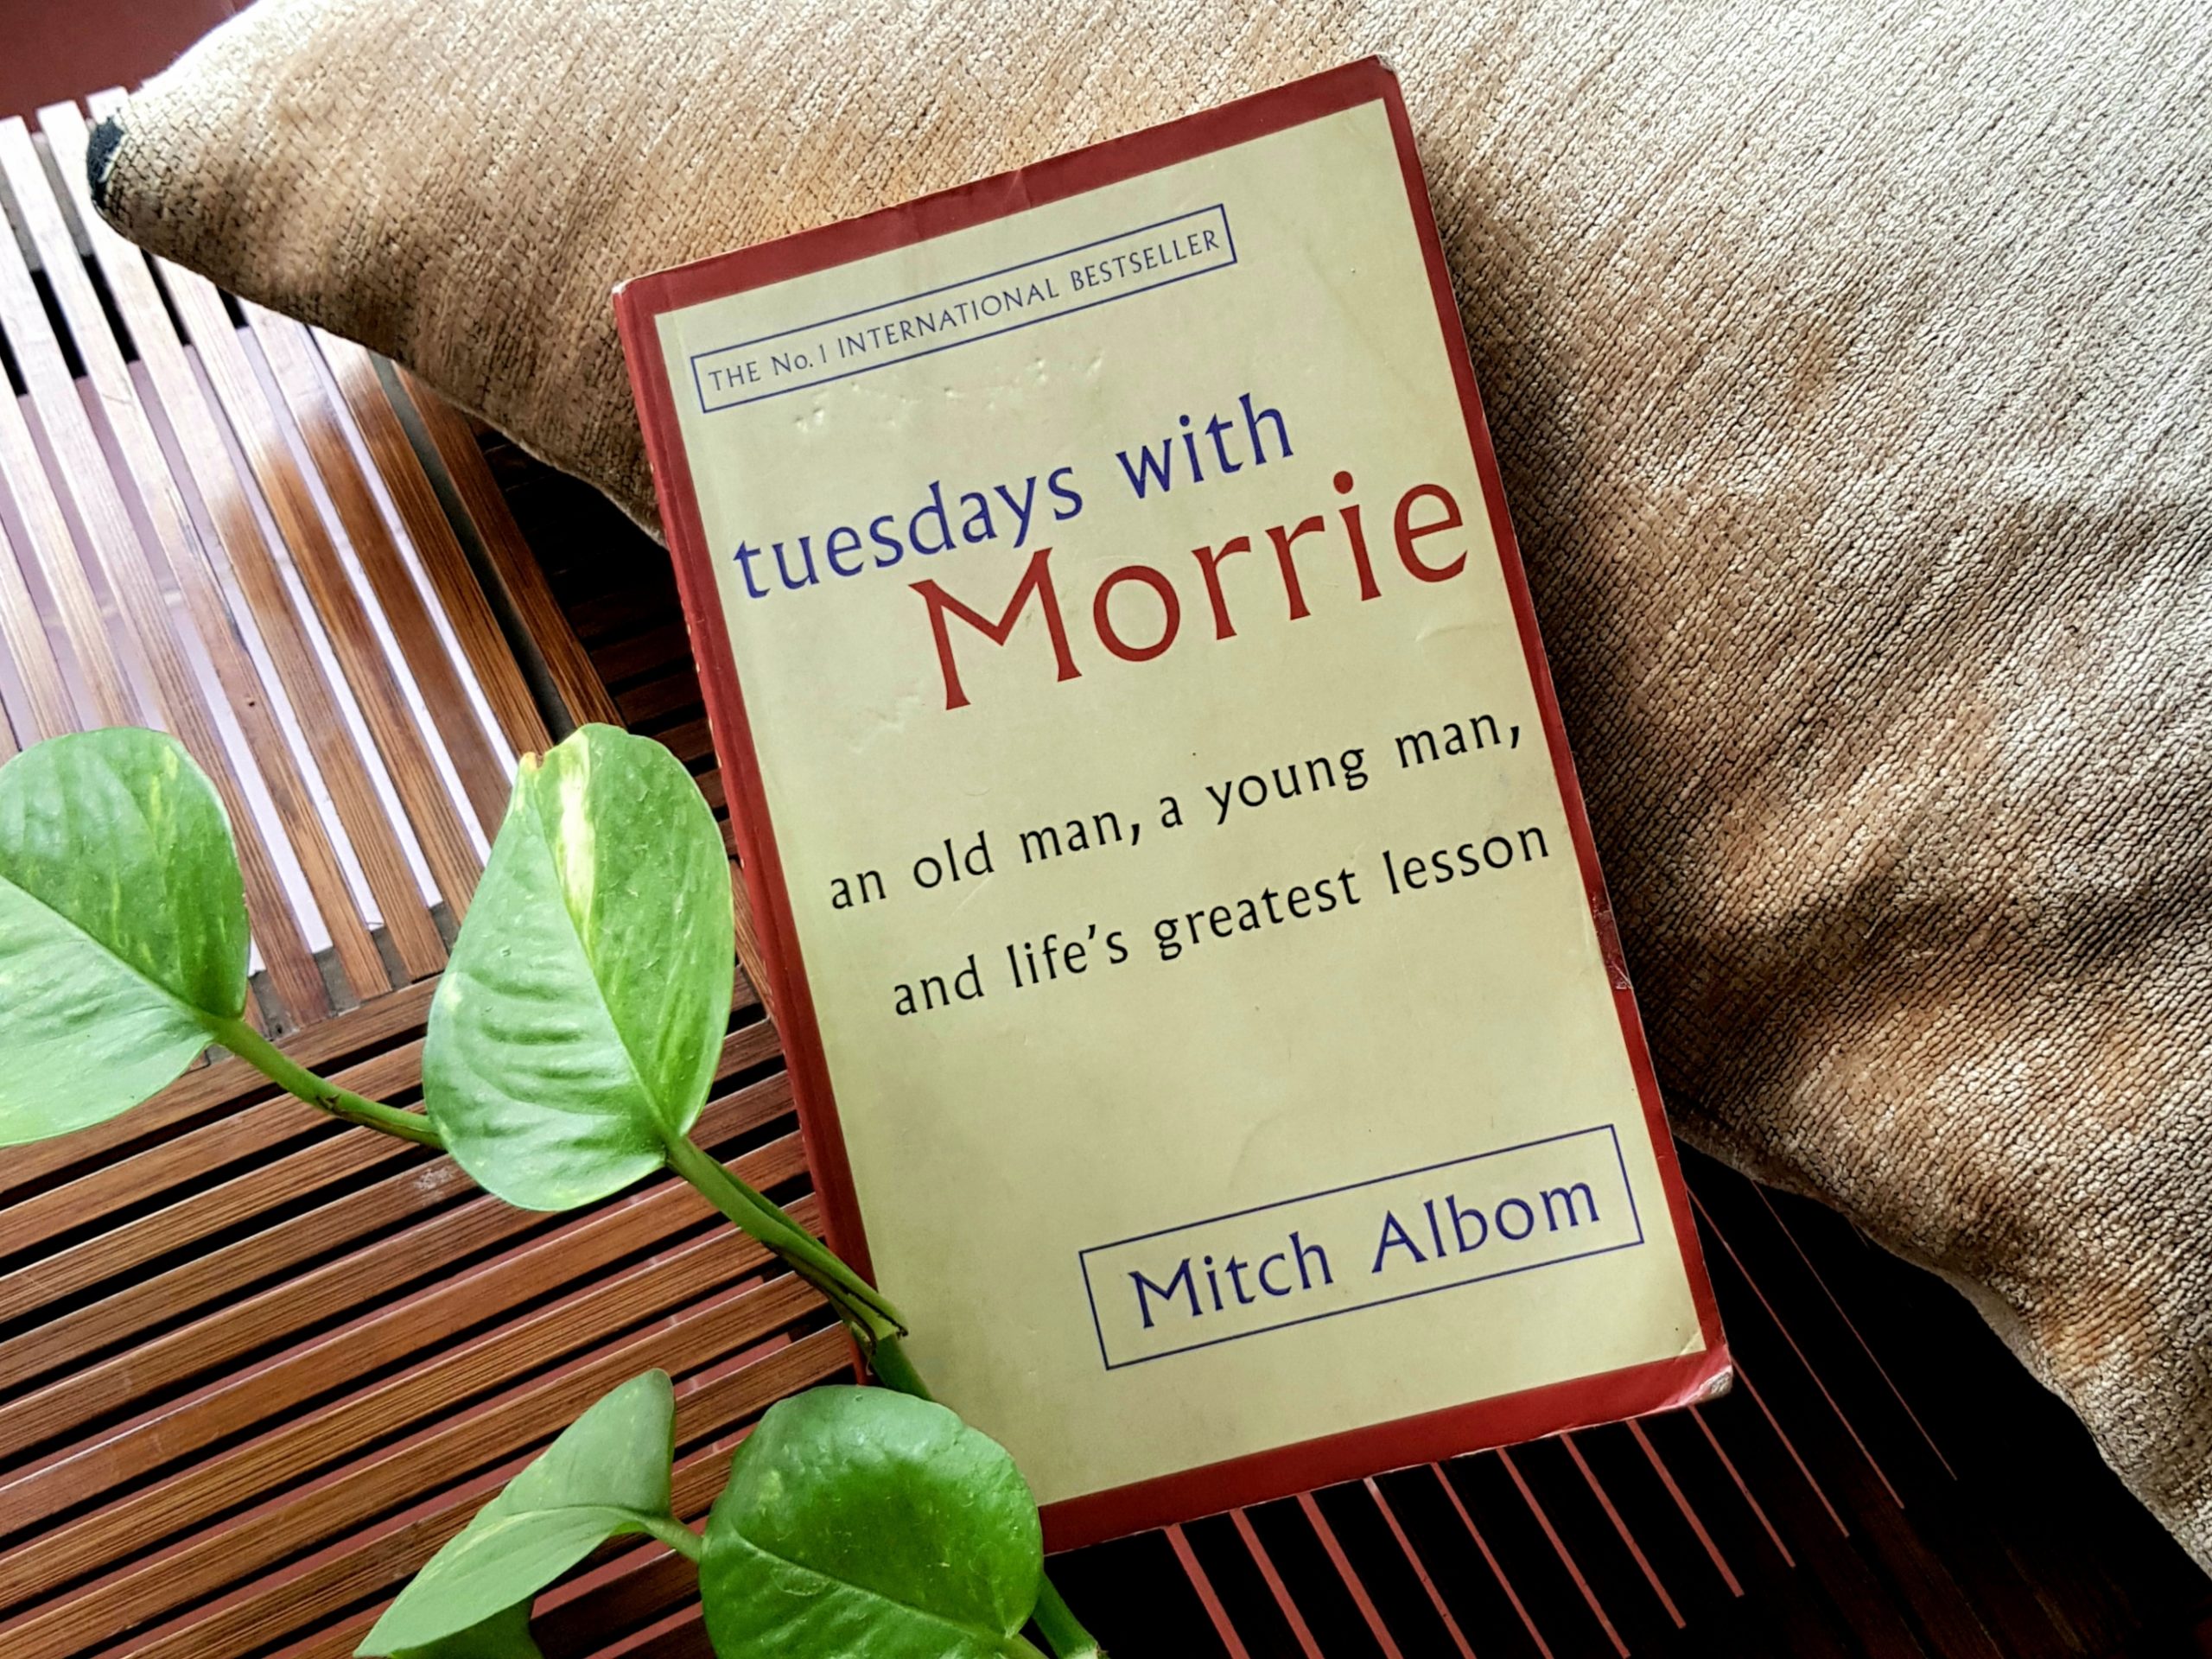 tuesdays with morrie book